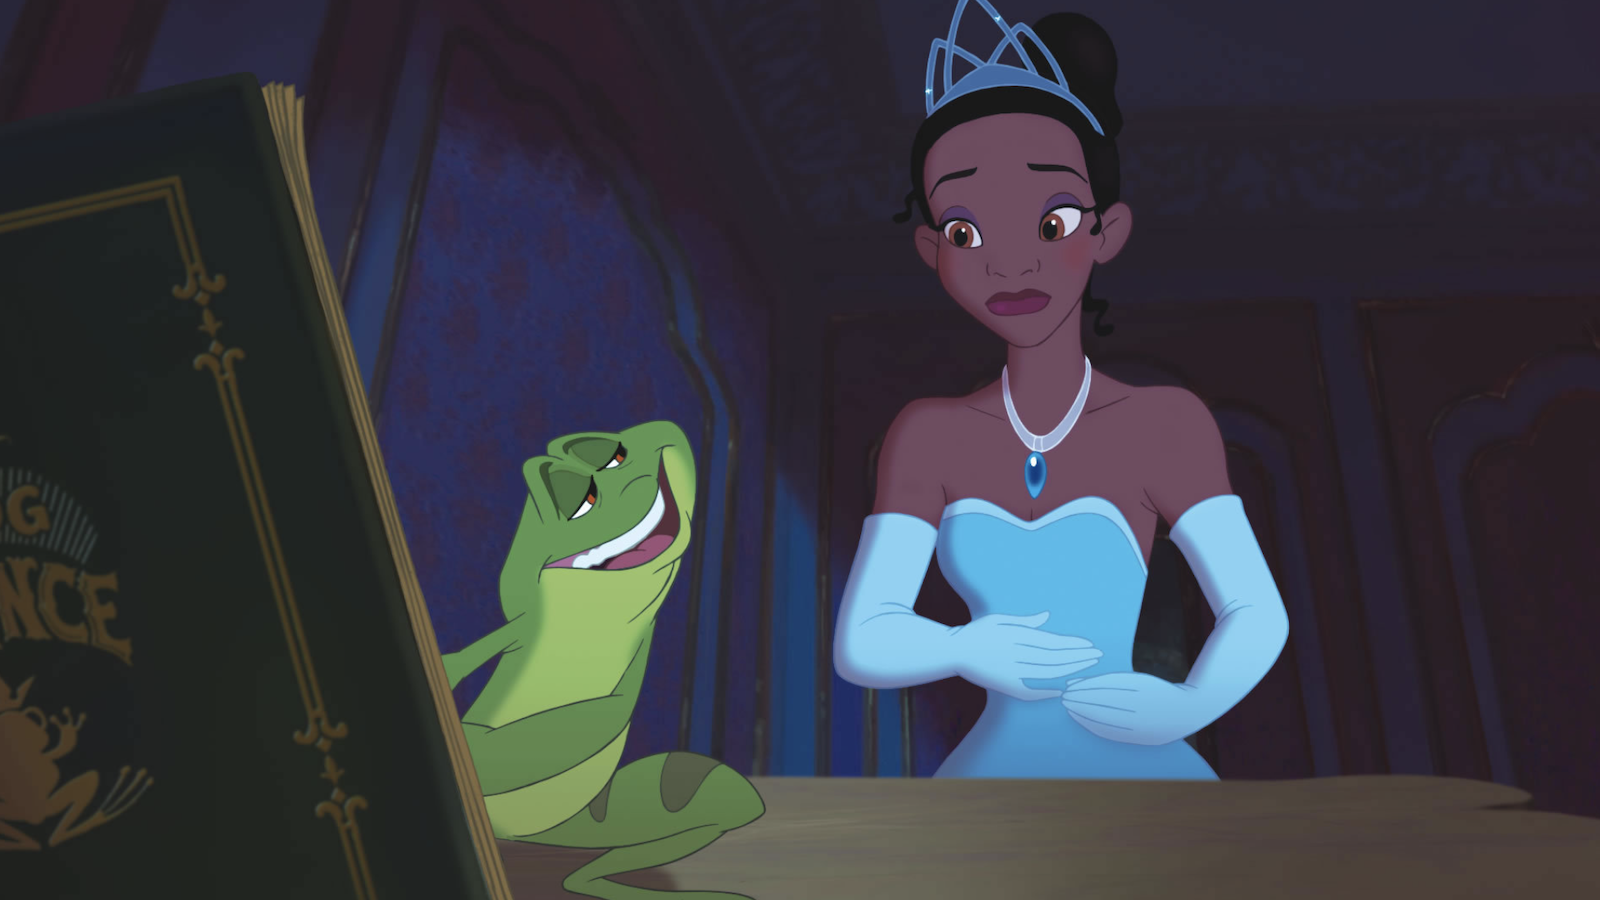 cartoon still of a green frog holding a book and talking to a Black girl dressed as a princess